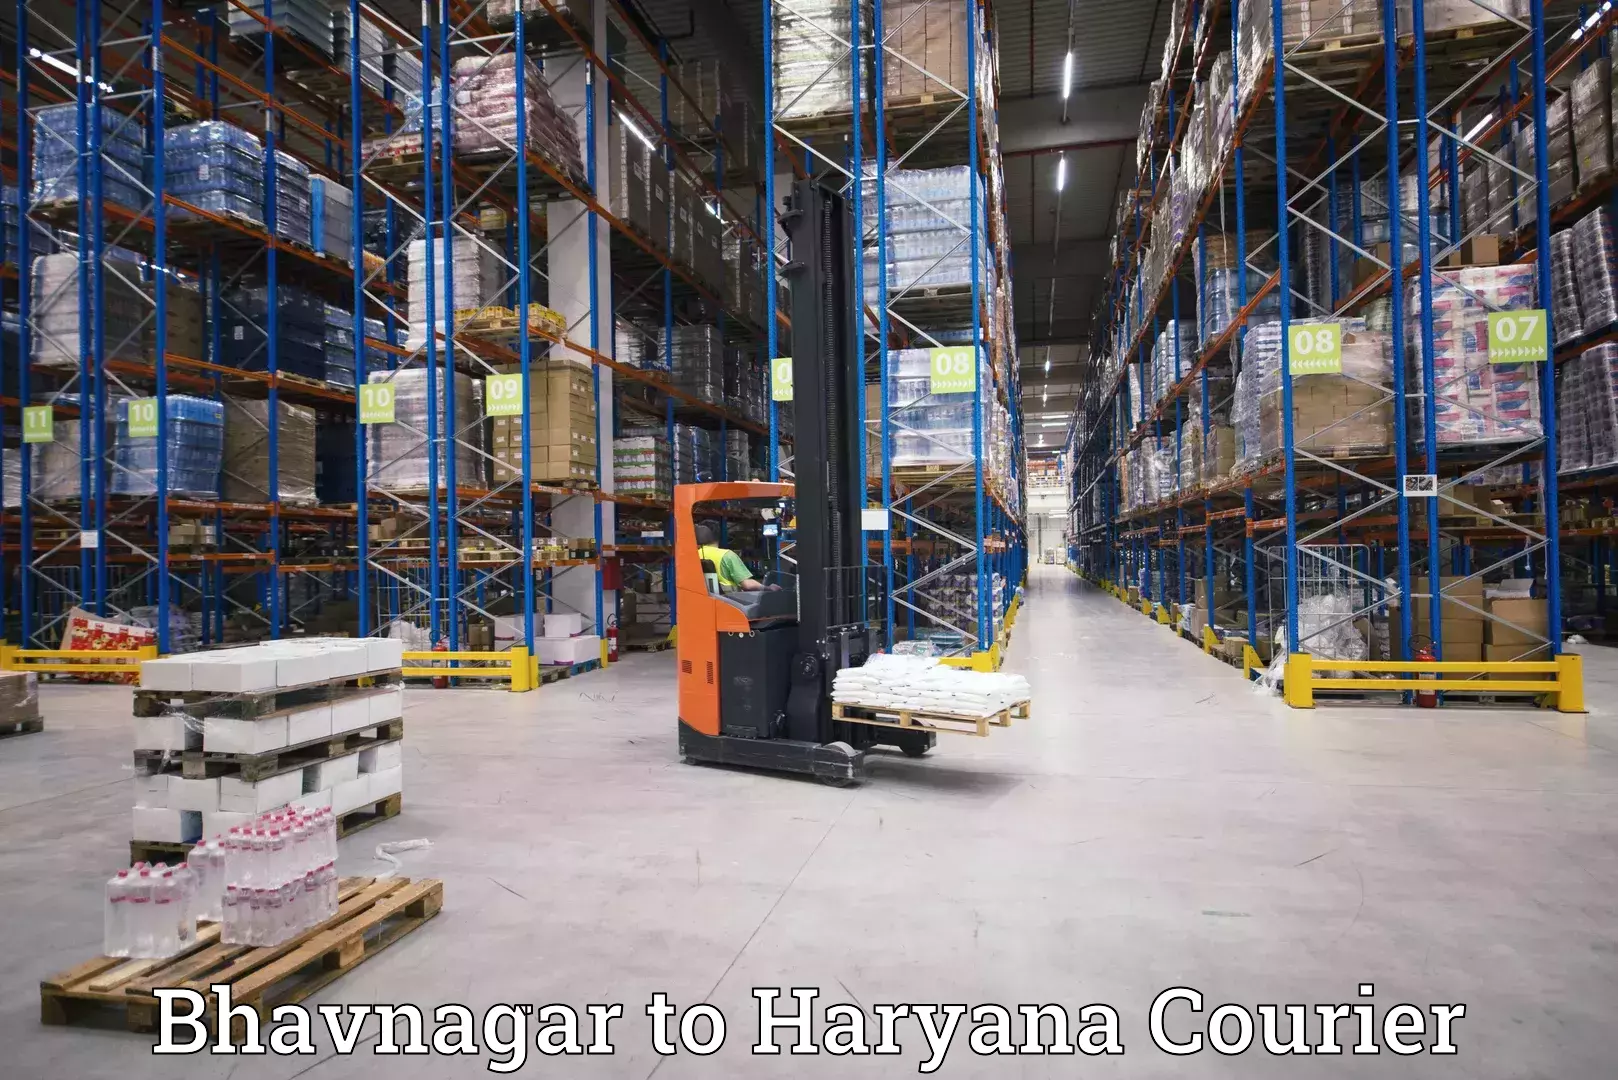 Global shipping networks in Bhavnagar to Bhiwani